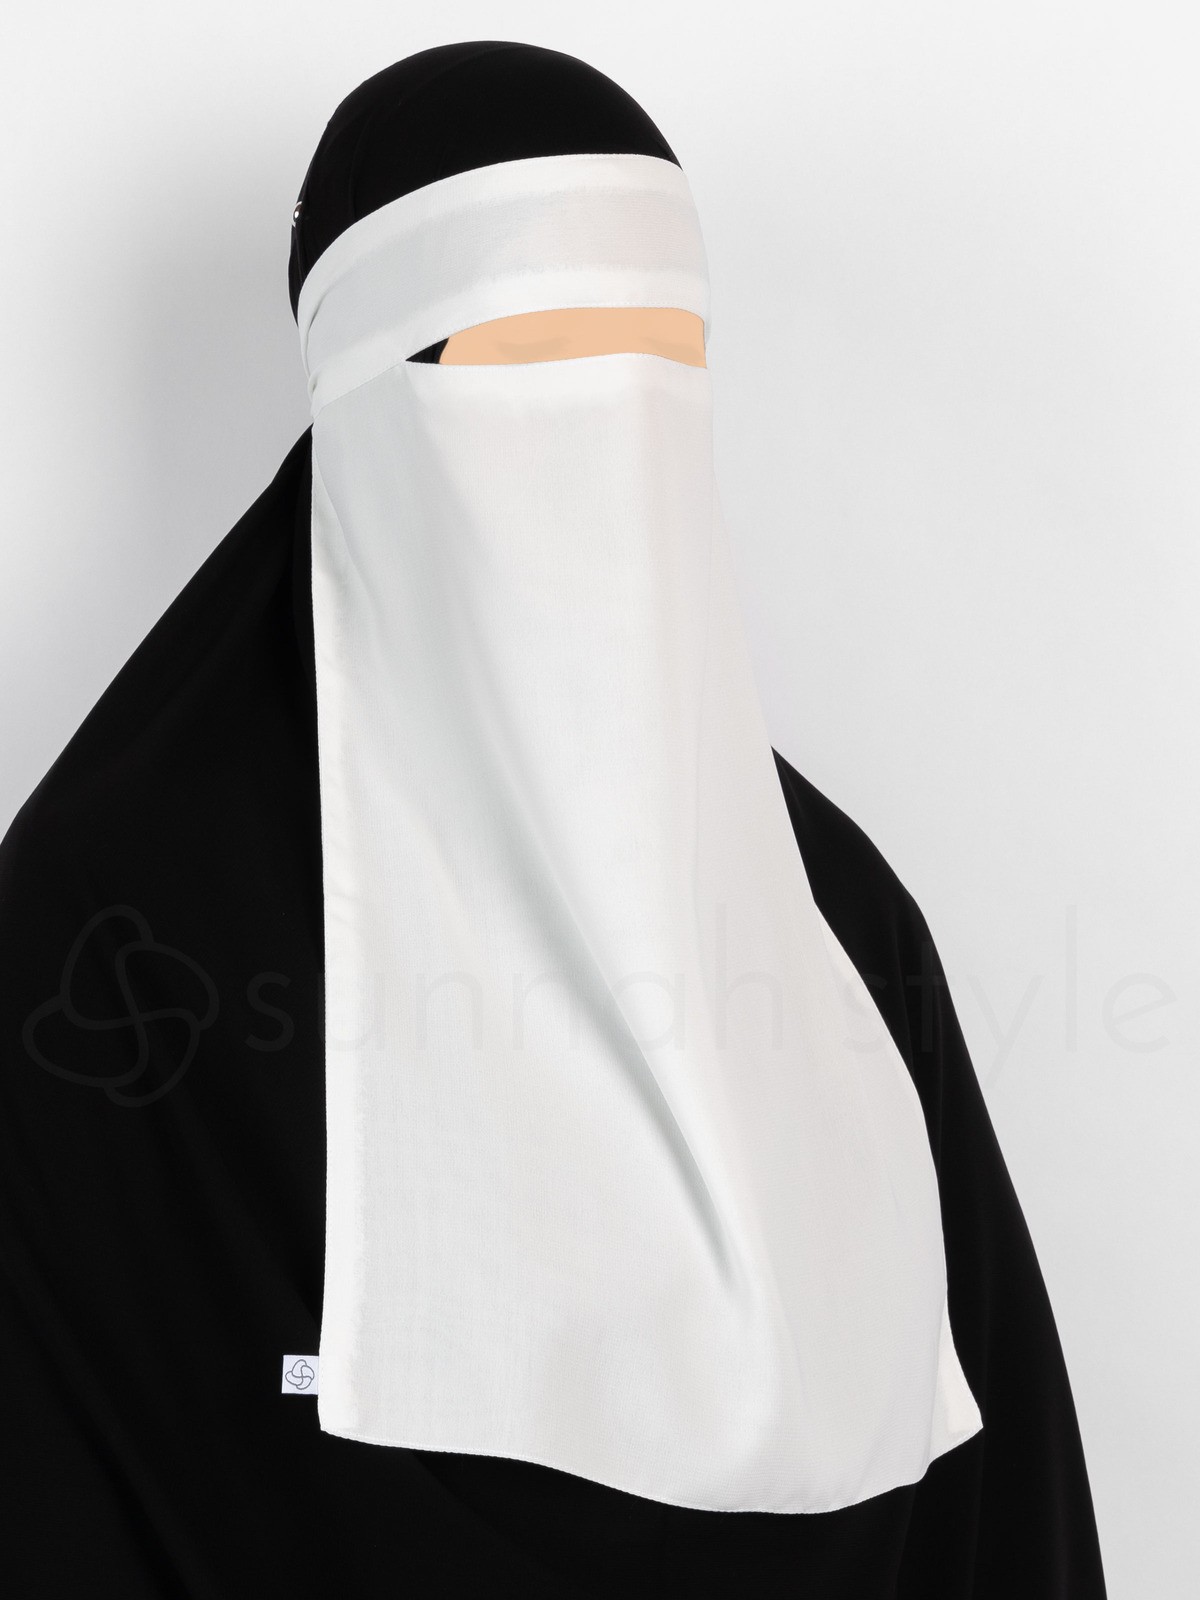 Sunnah Style - One Layer Niqab (White)